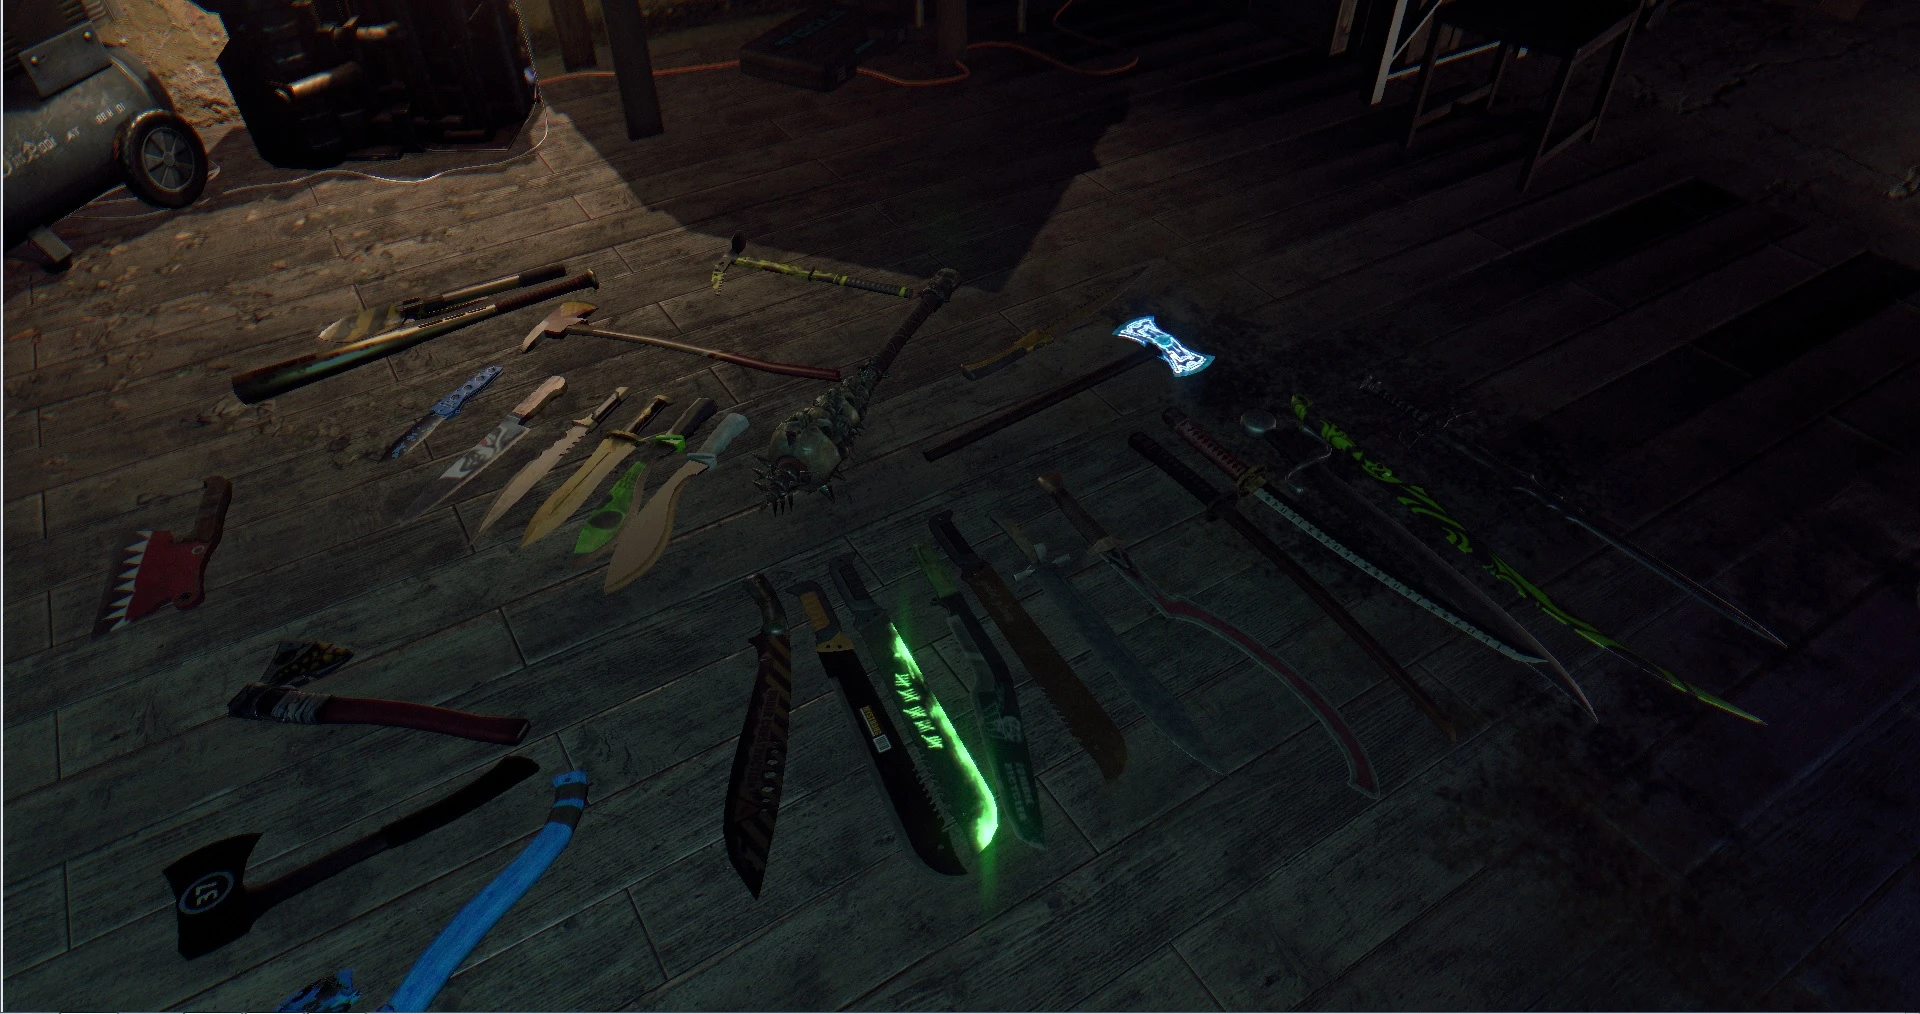 dying light weapons for zero